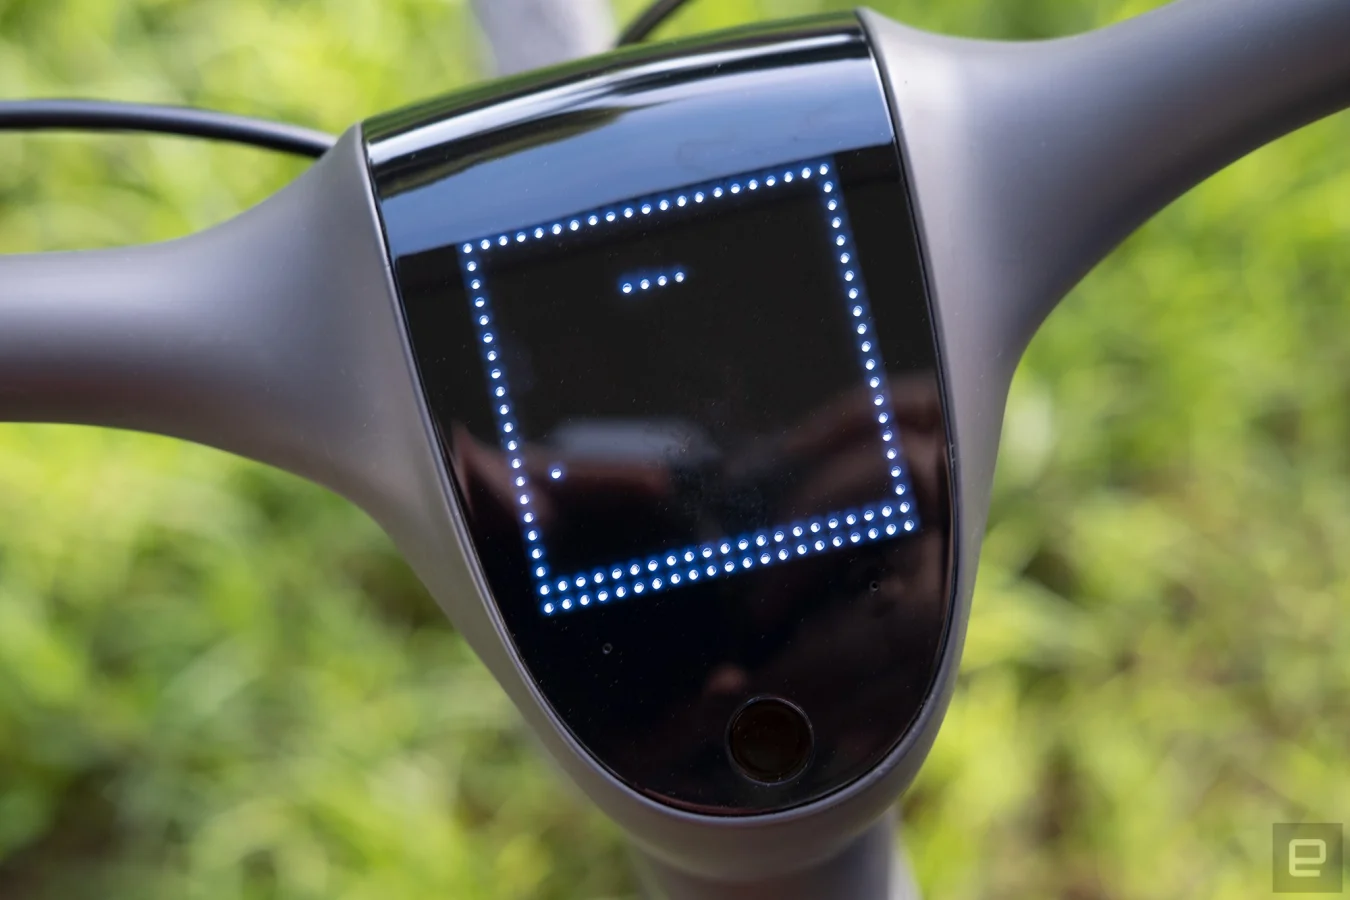 A game of the Nokia-classic, Snake, is shown on the Urtopia ebike's built-in display.